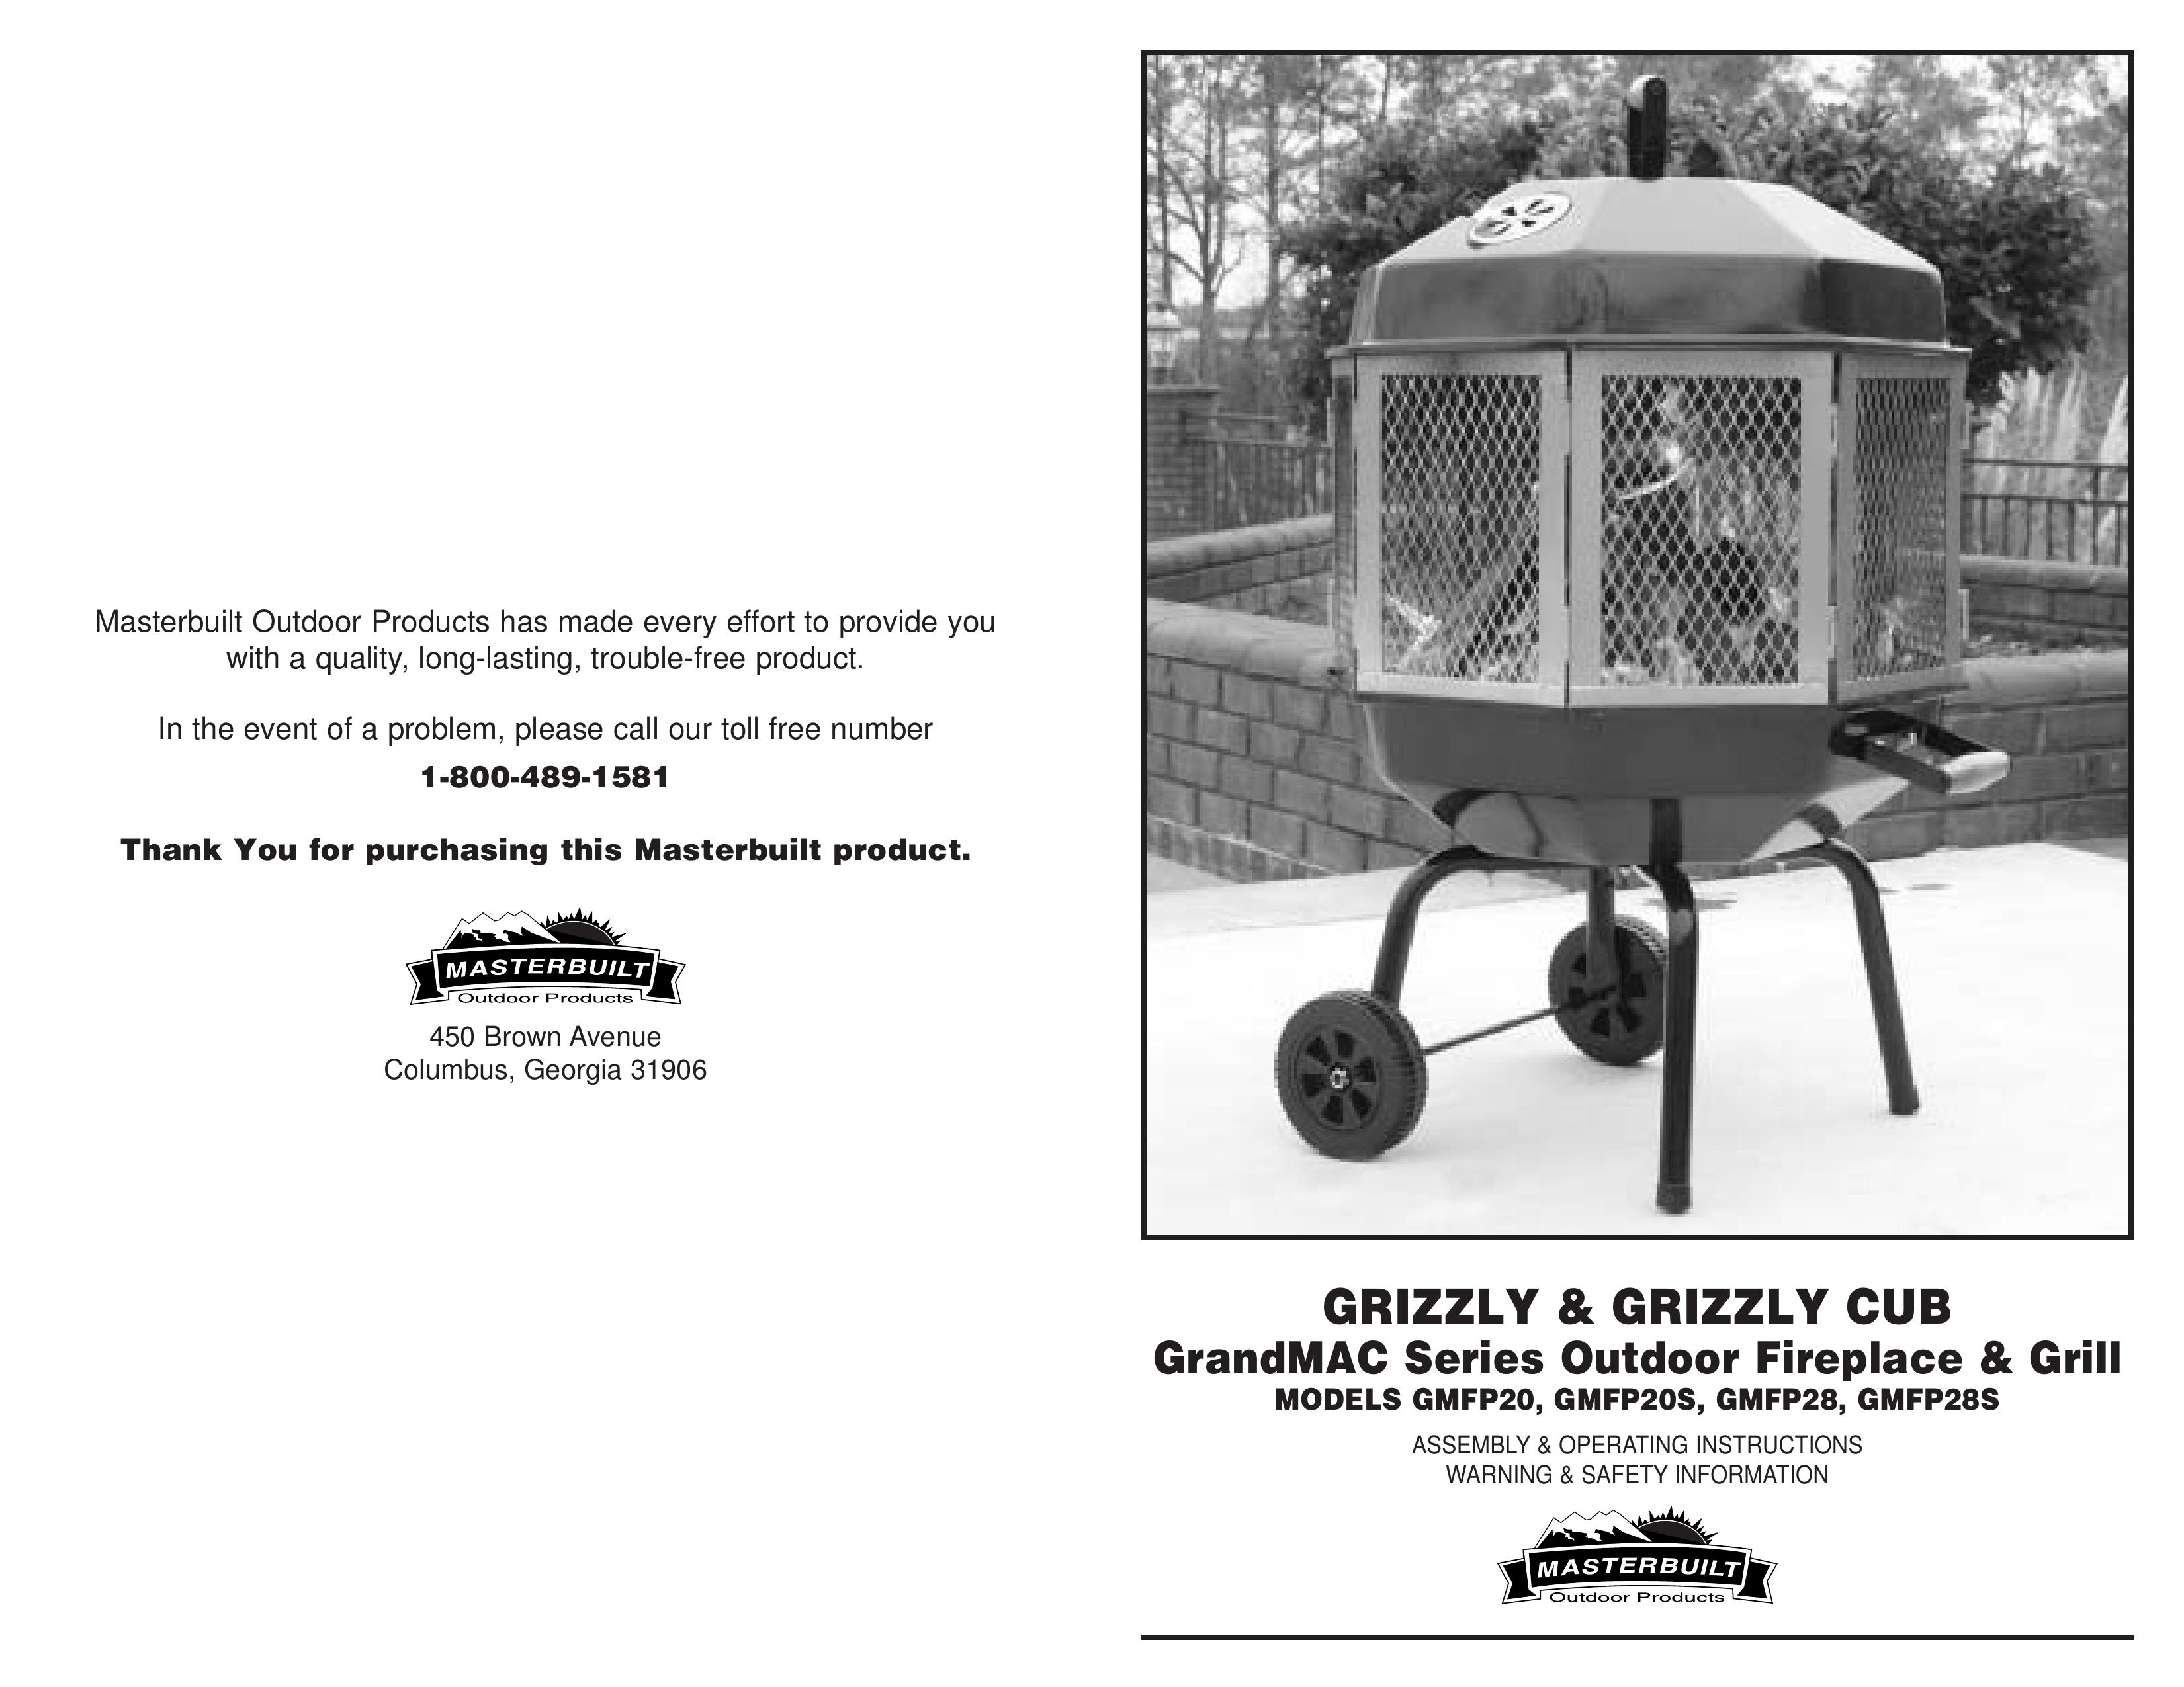 Grizzly GMFP20 Outdoor Fireplace User Manual